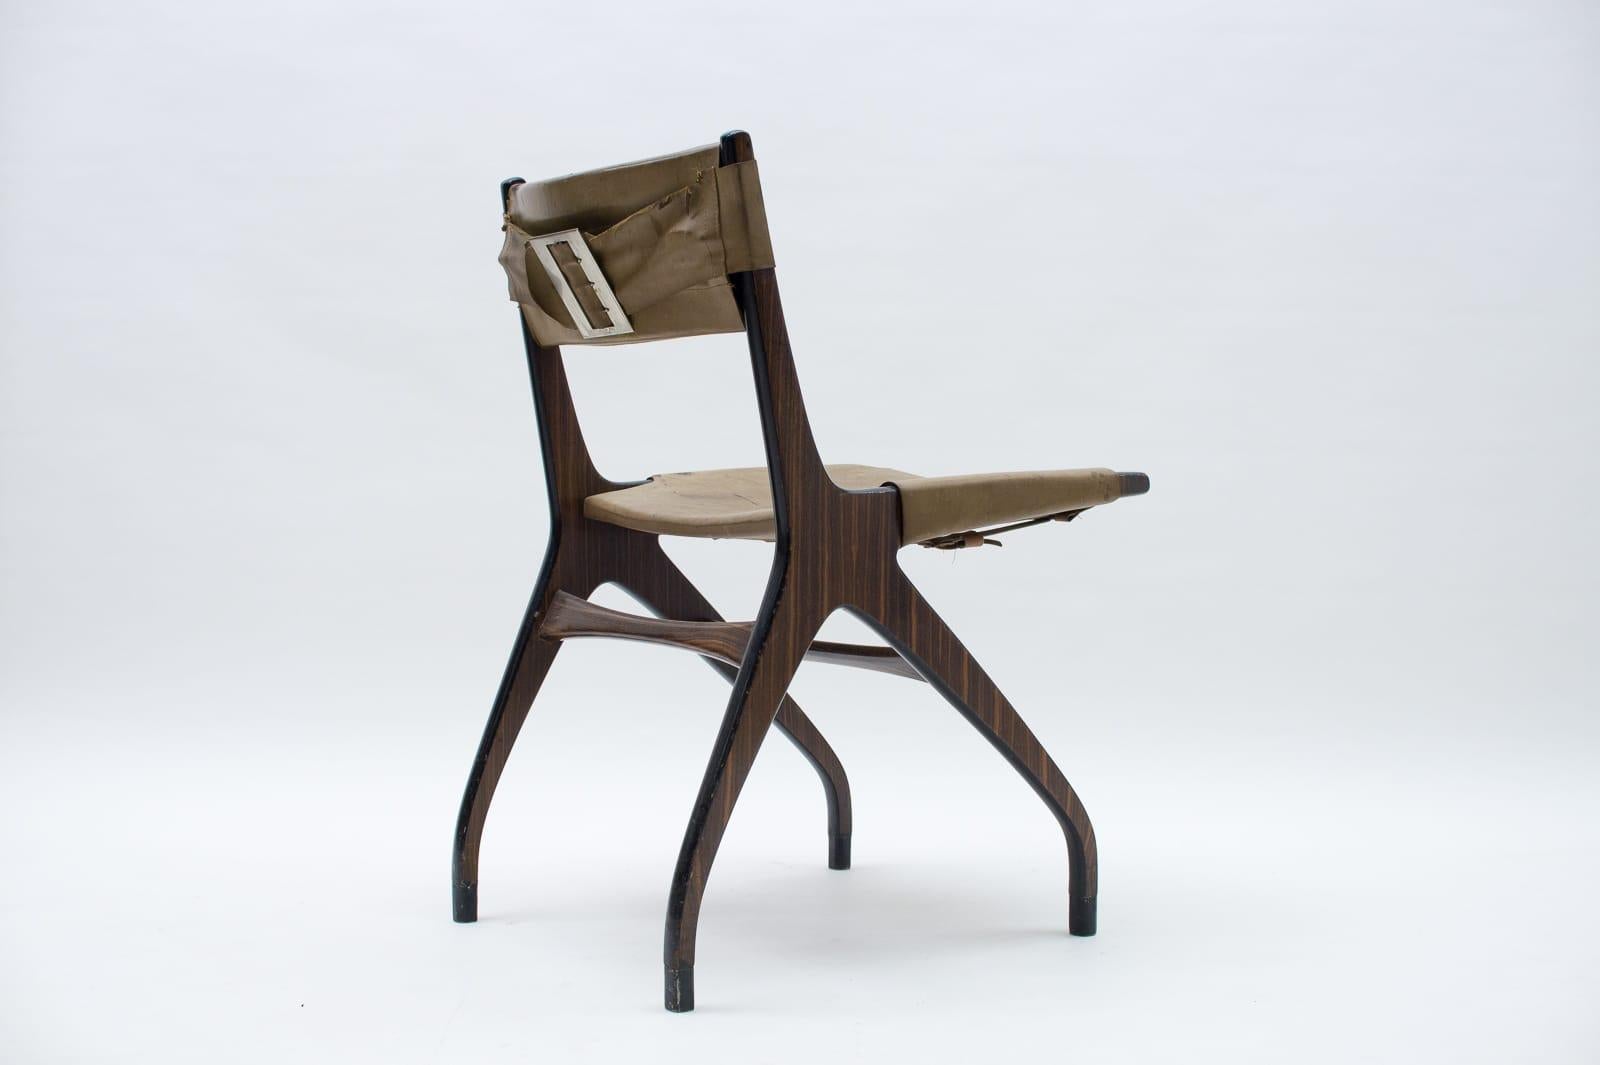 Italian Wooden Chair with Leather Upholstery, 1960s For Sale 2